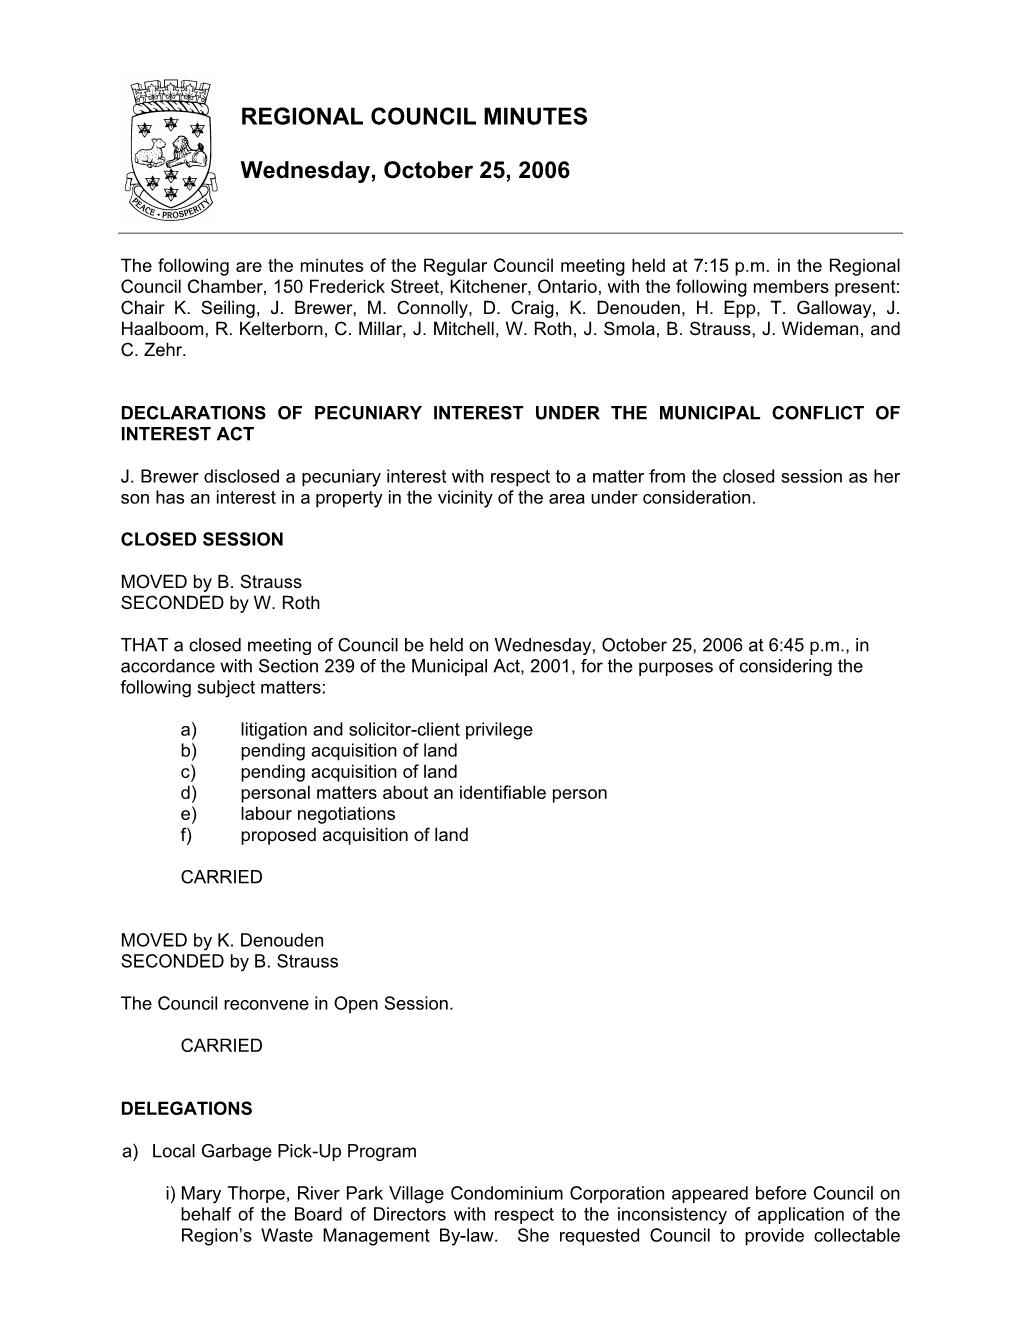 REGIONAL COUNCIL MINUTES Wednesday, October 25, 2006